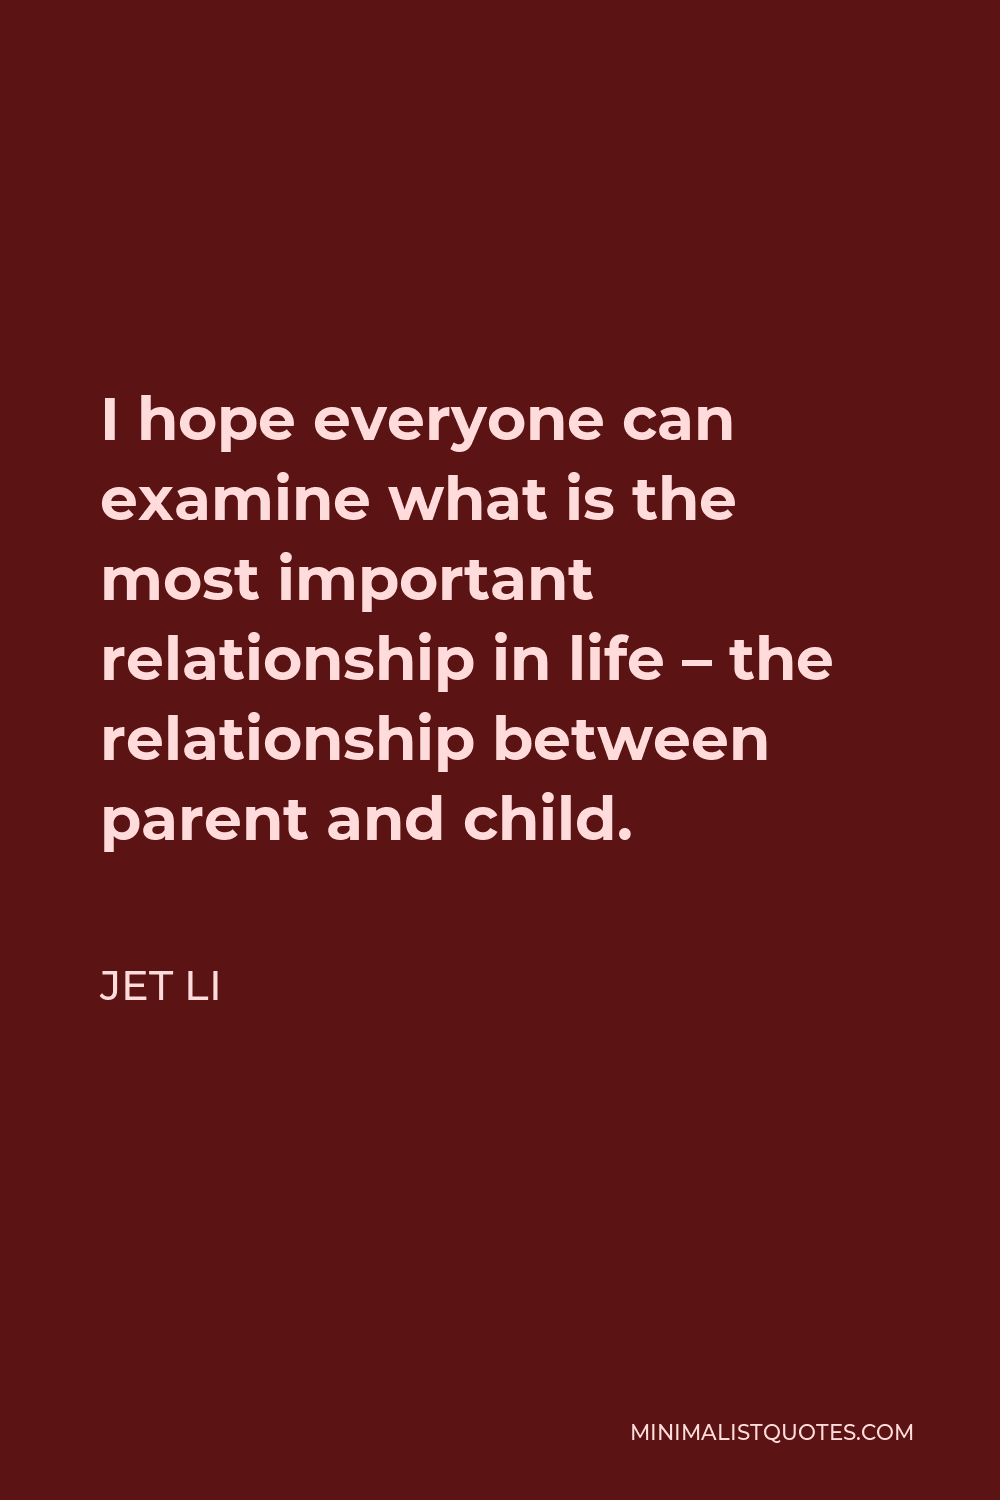 Jet Li Quote - I hope everyone can examine what is the most important relationship in life – the relationship between parent and child.